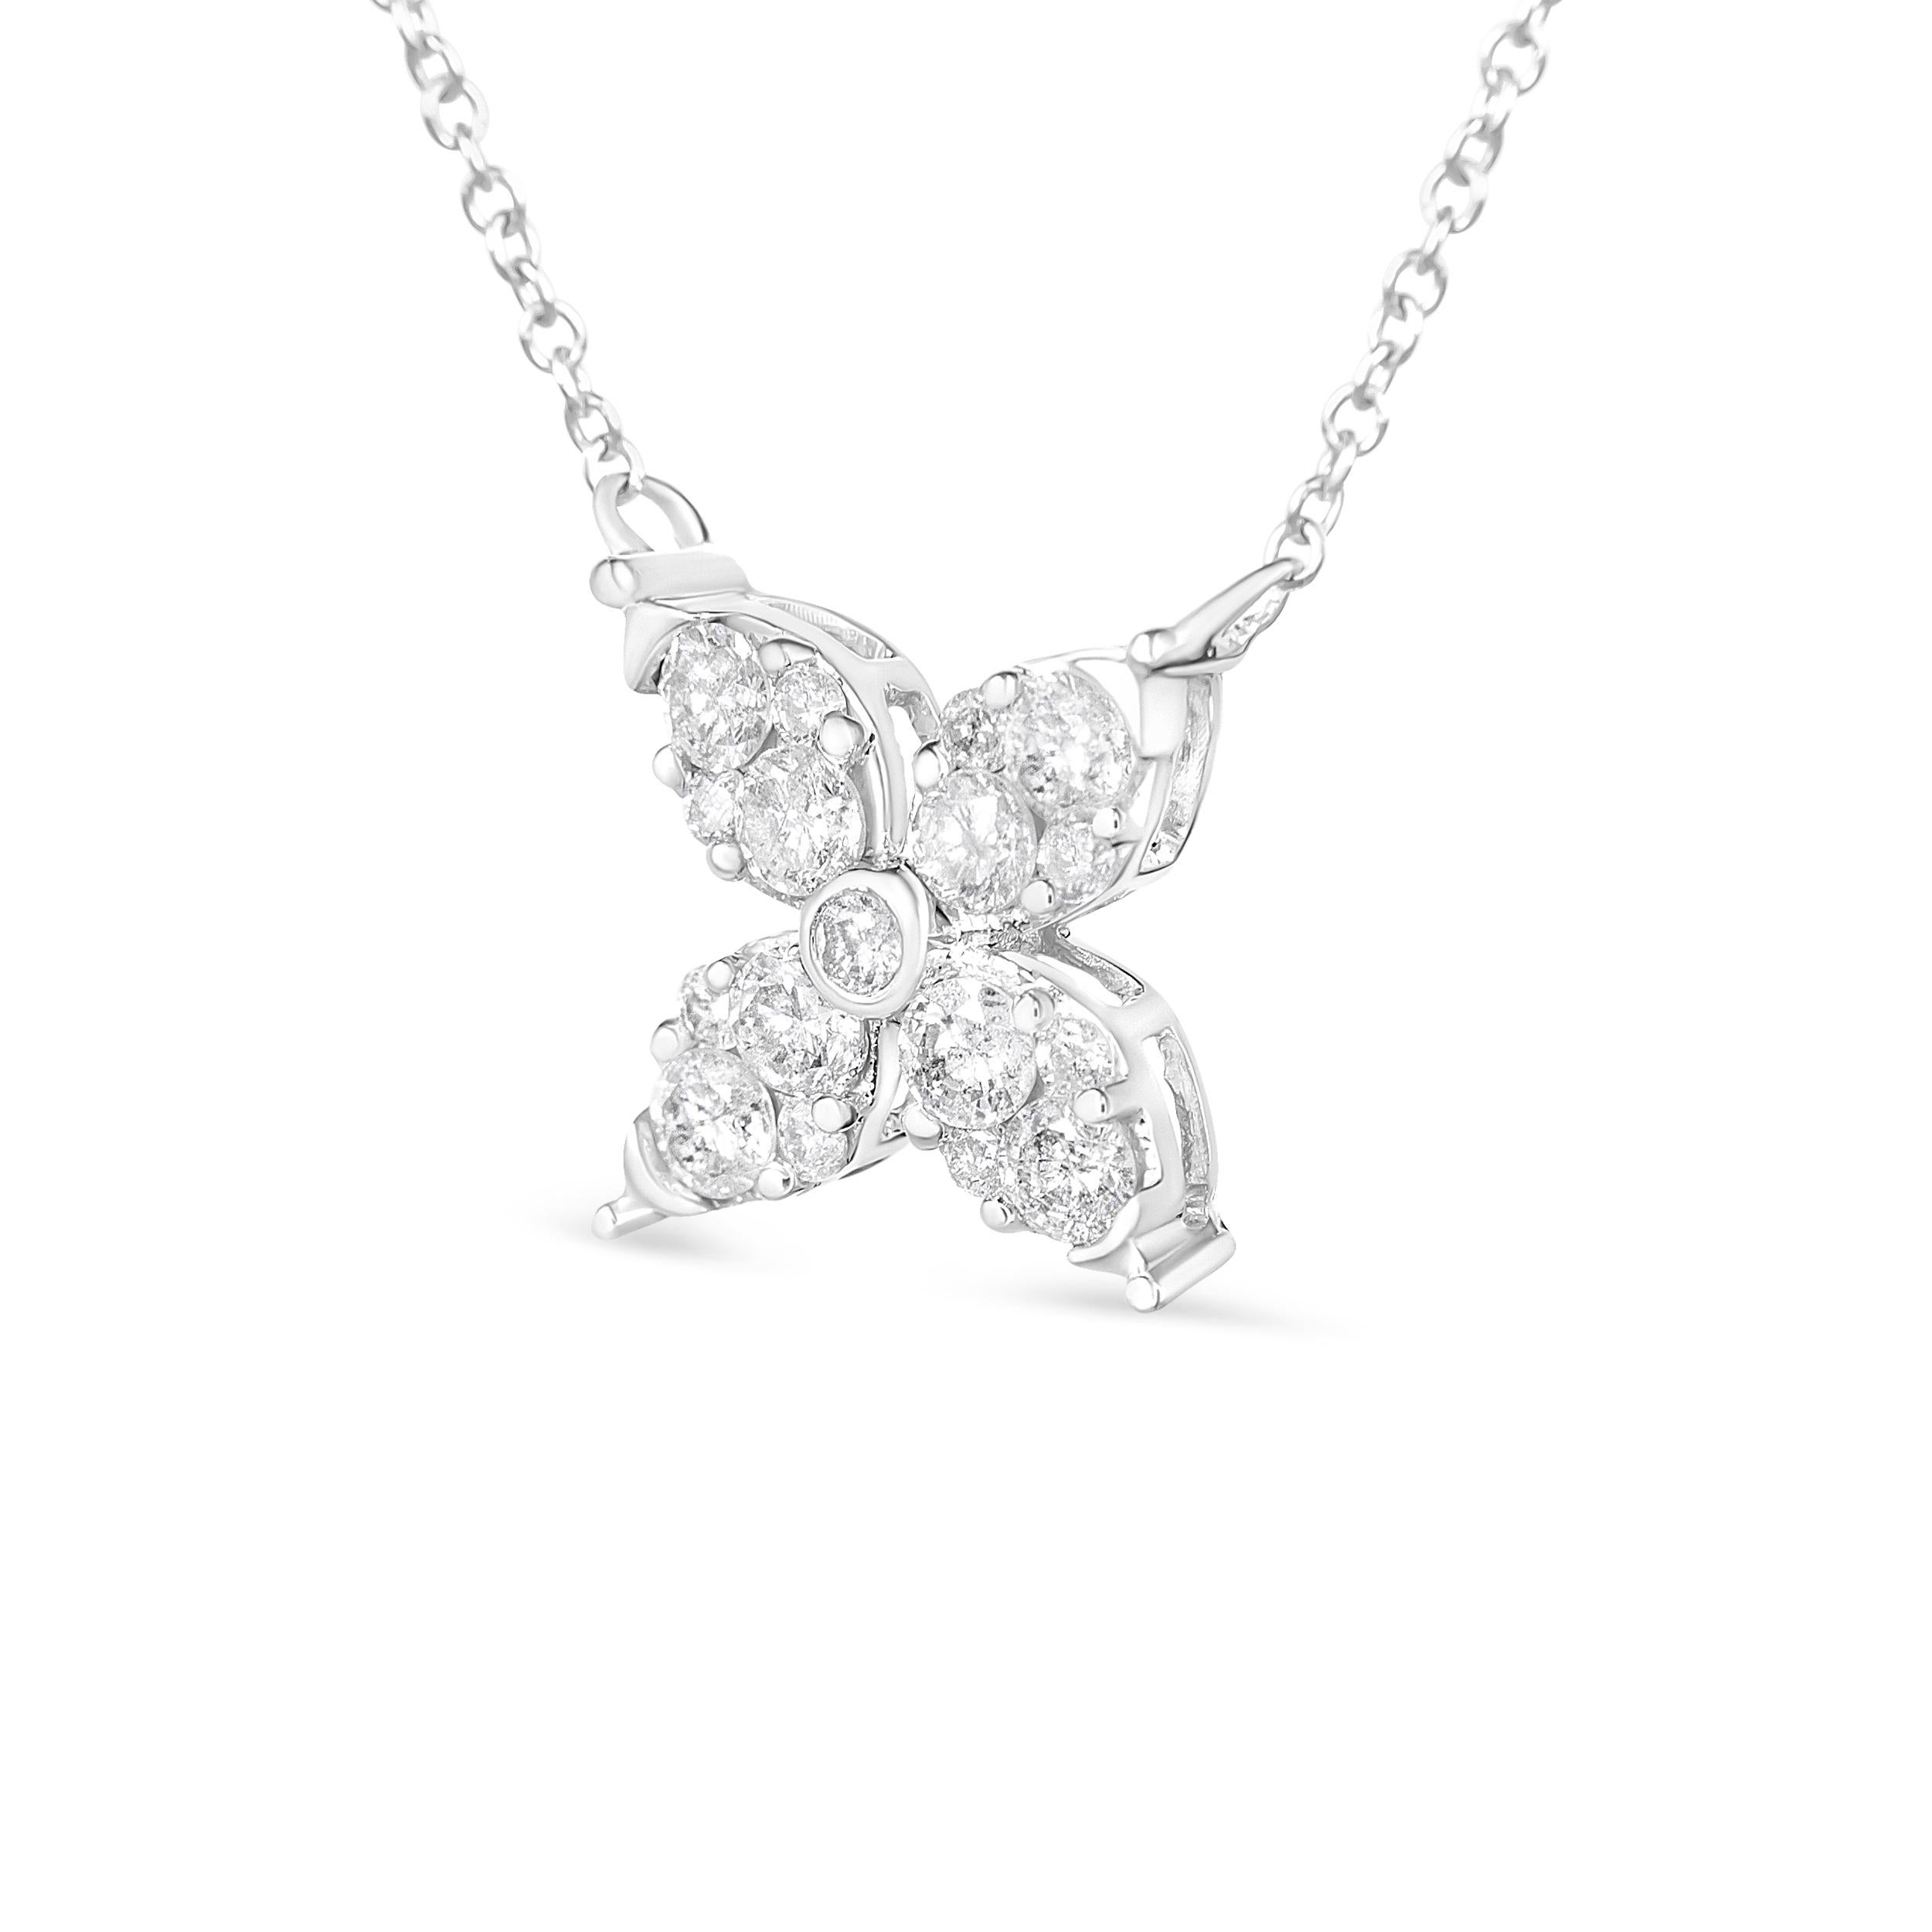 Unveil the allure of luck and elegance with this exquisite pendant necklace. Crafted in 10K white gold, it showcases a marquise-shaped 4-leaf clover, a symbol of fortune and grace. Adorned with 17 brilliant round diamonds, this piece radiates a